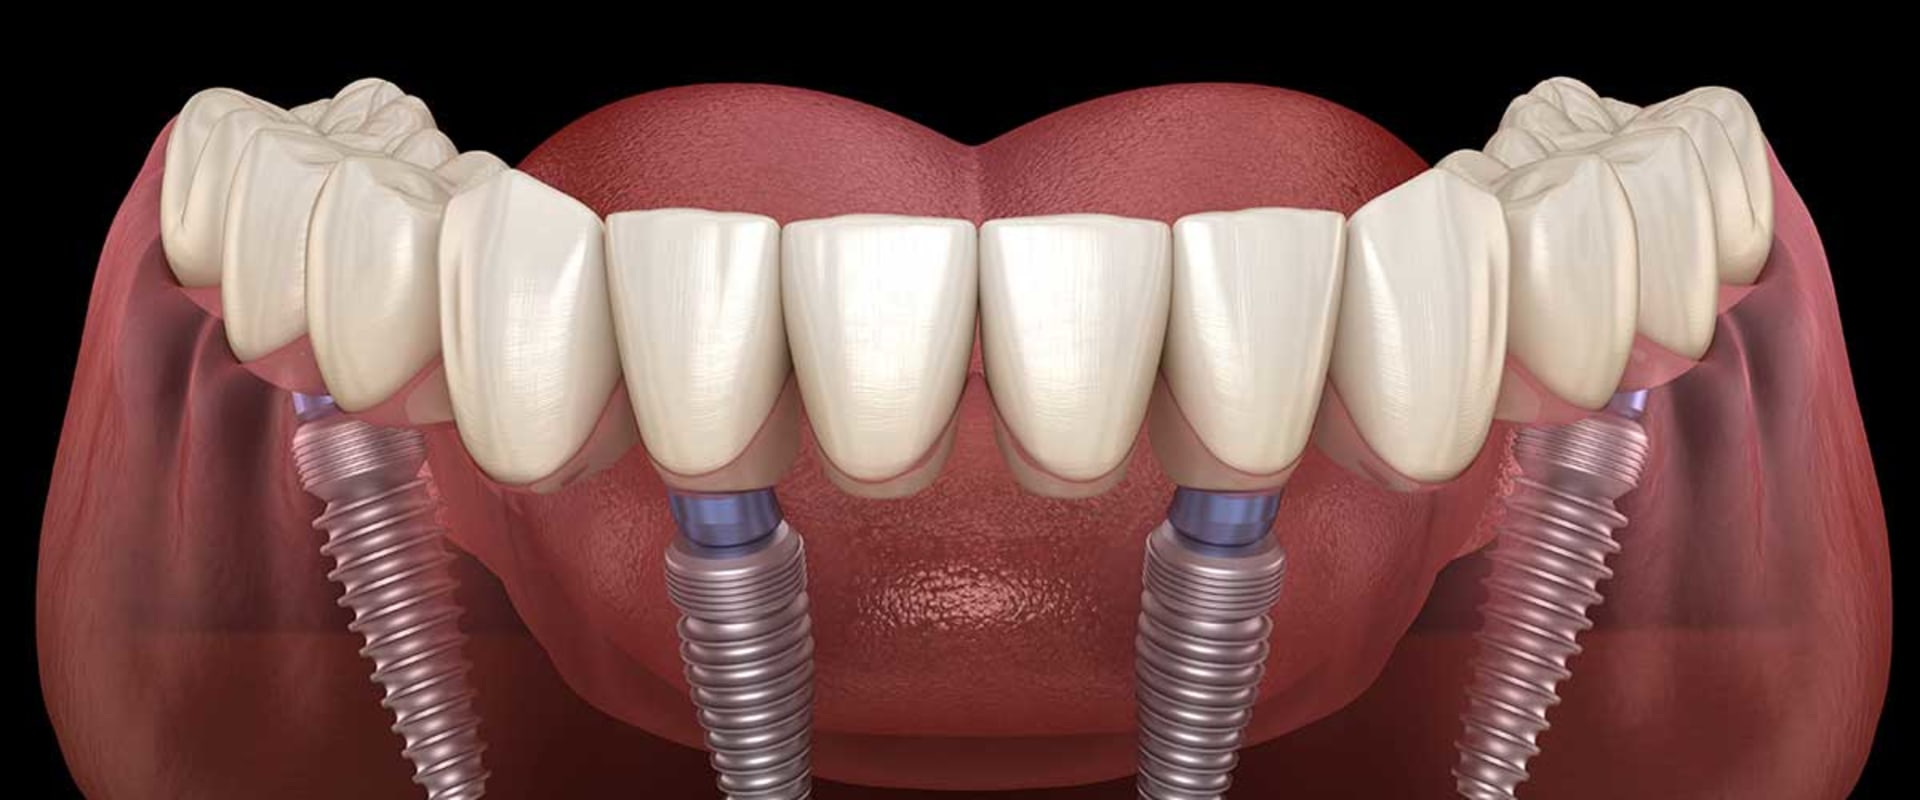 Can People with Diabetes Get All-on-4 Dental Implants?